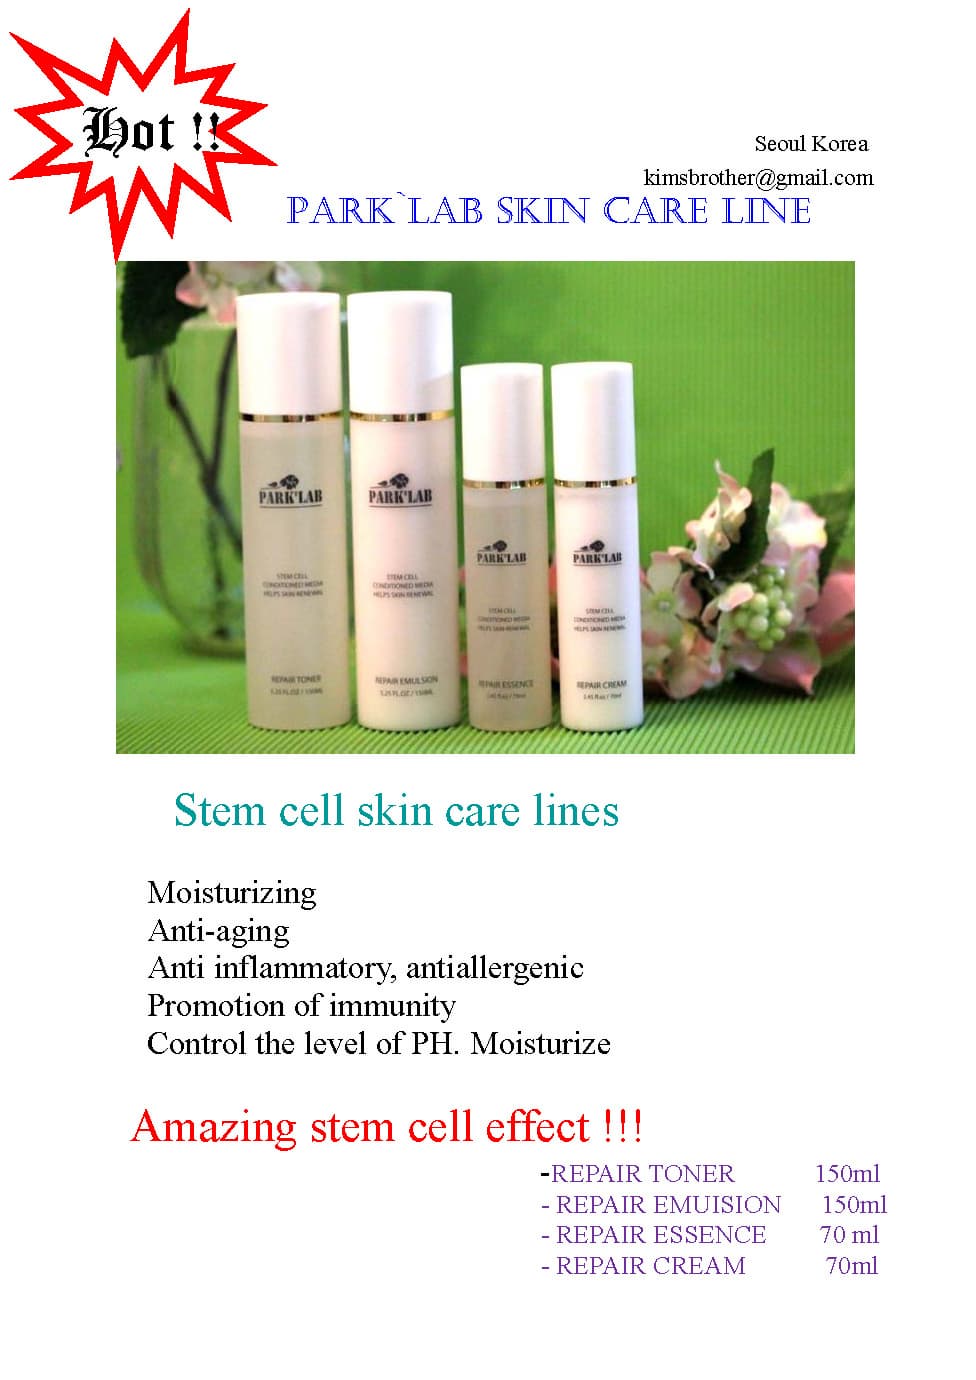 Stem cell skin care lines